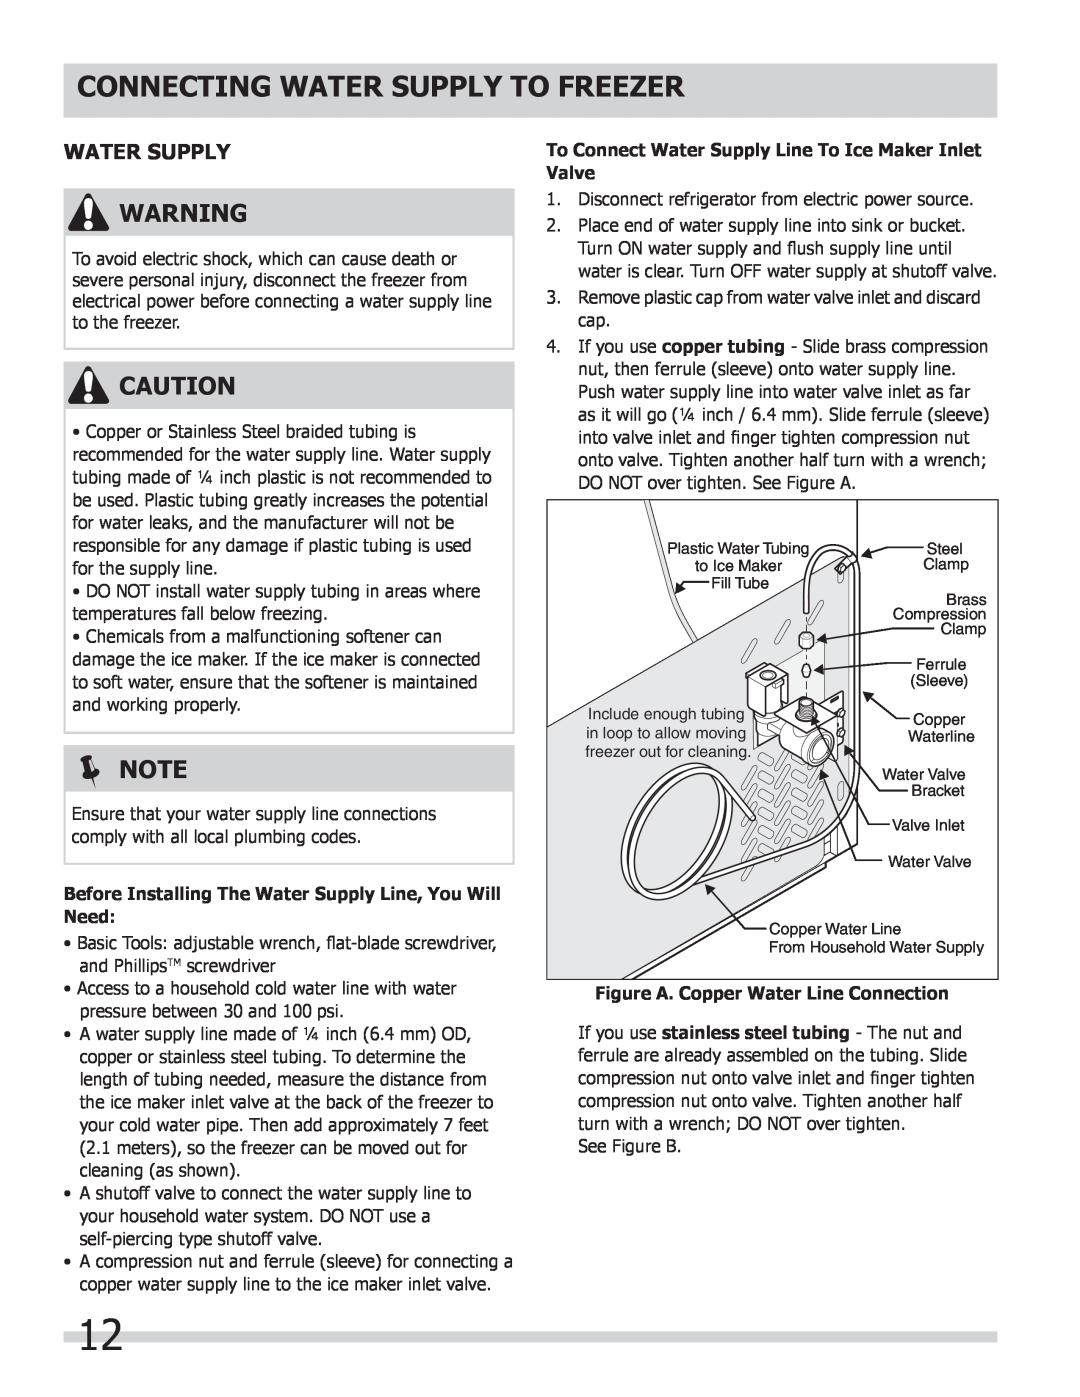 Frigidaire FPUH19D7LF, 297298800 important safety instructions Connecting Water Supply To Freezer,  Note 